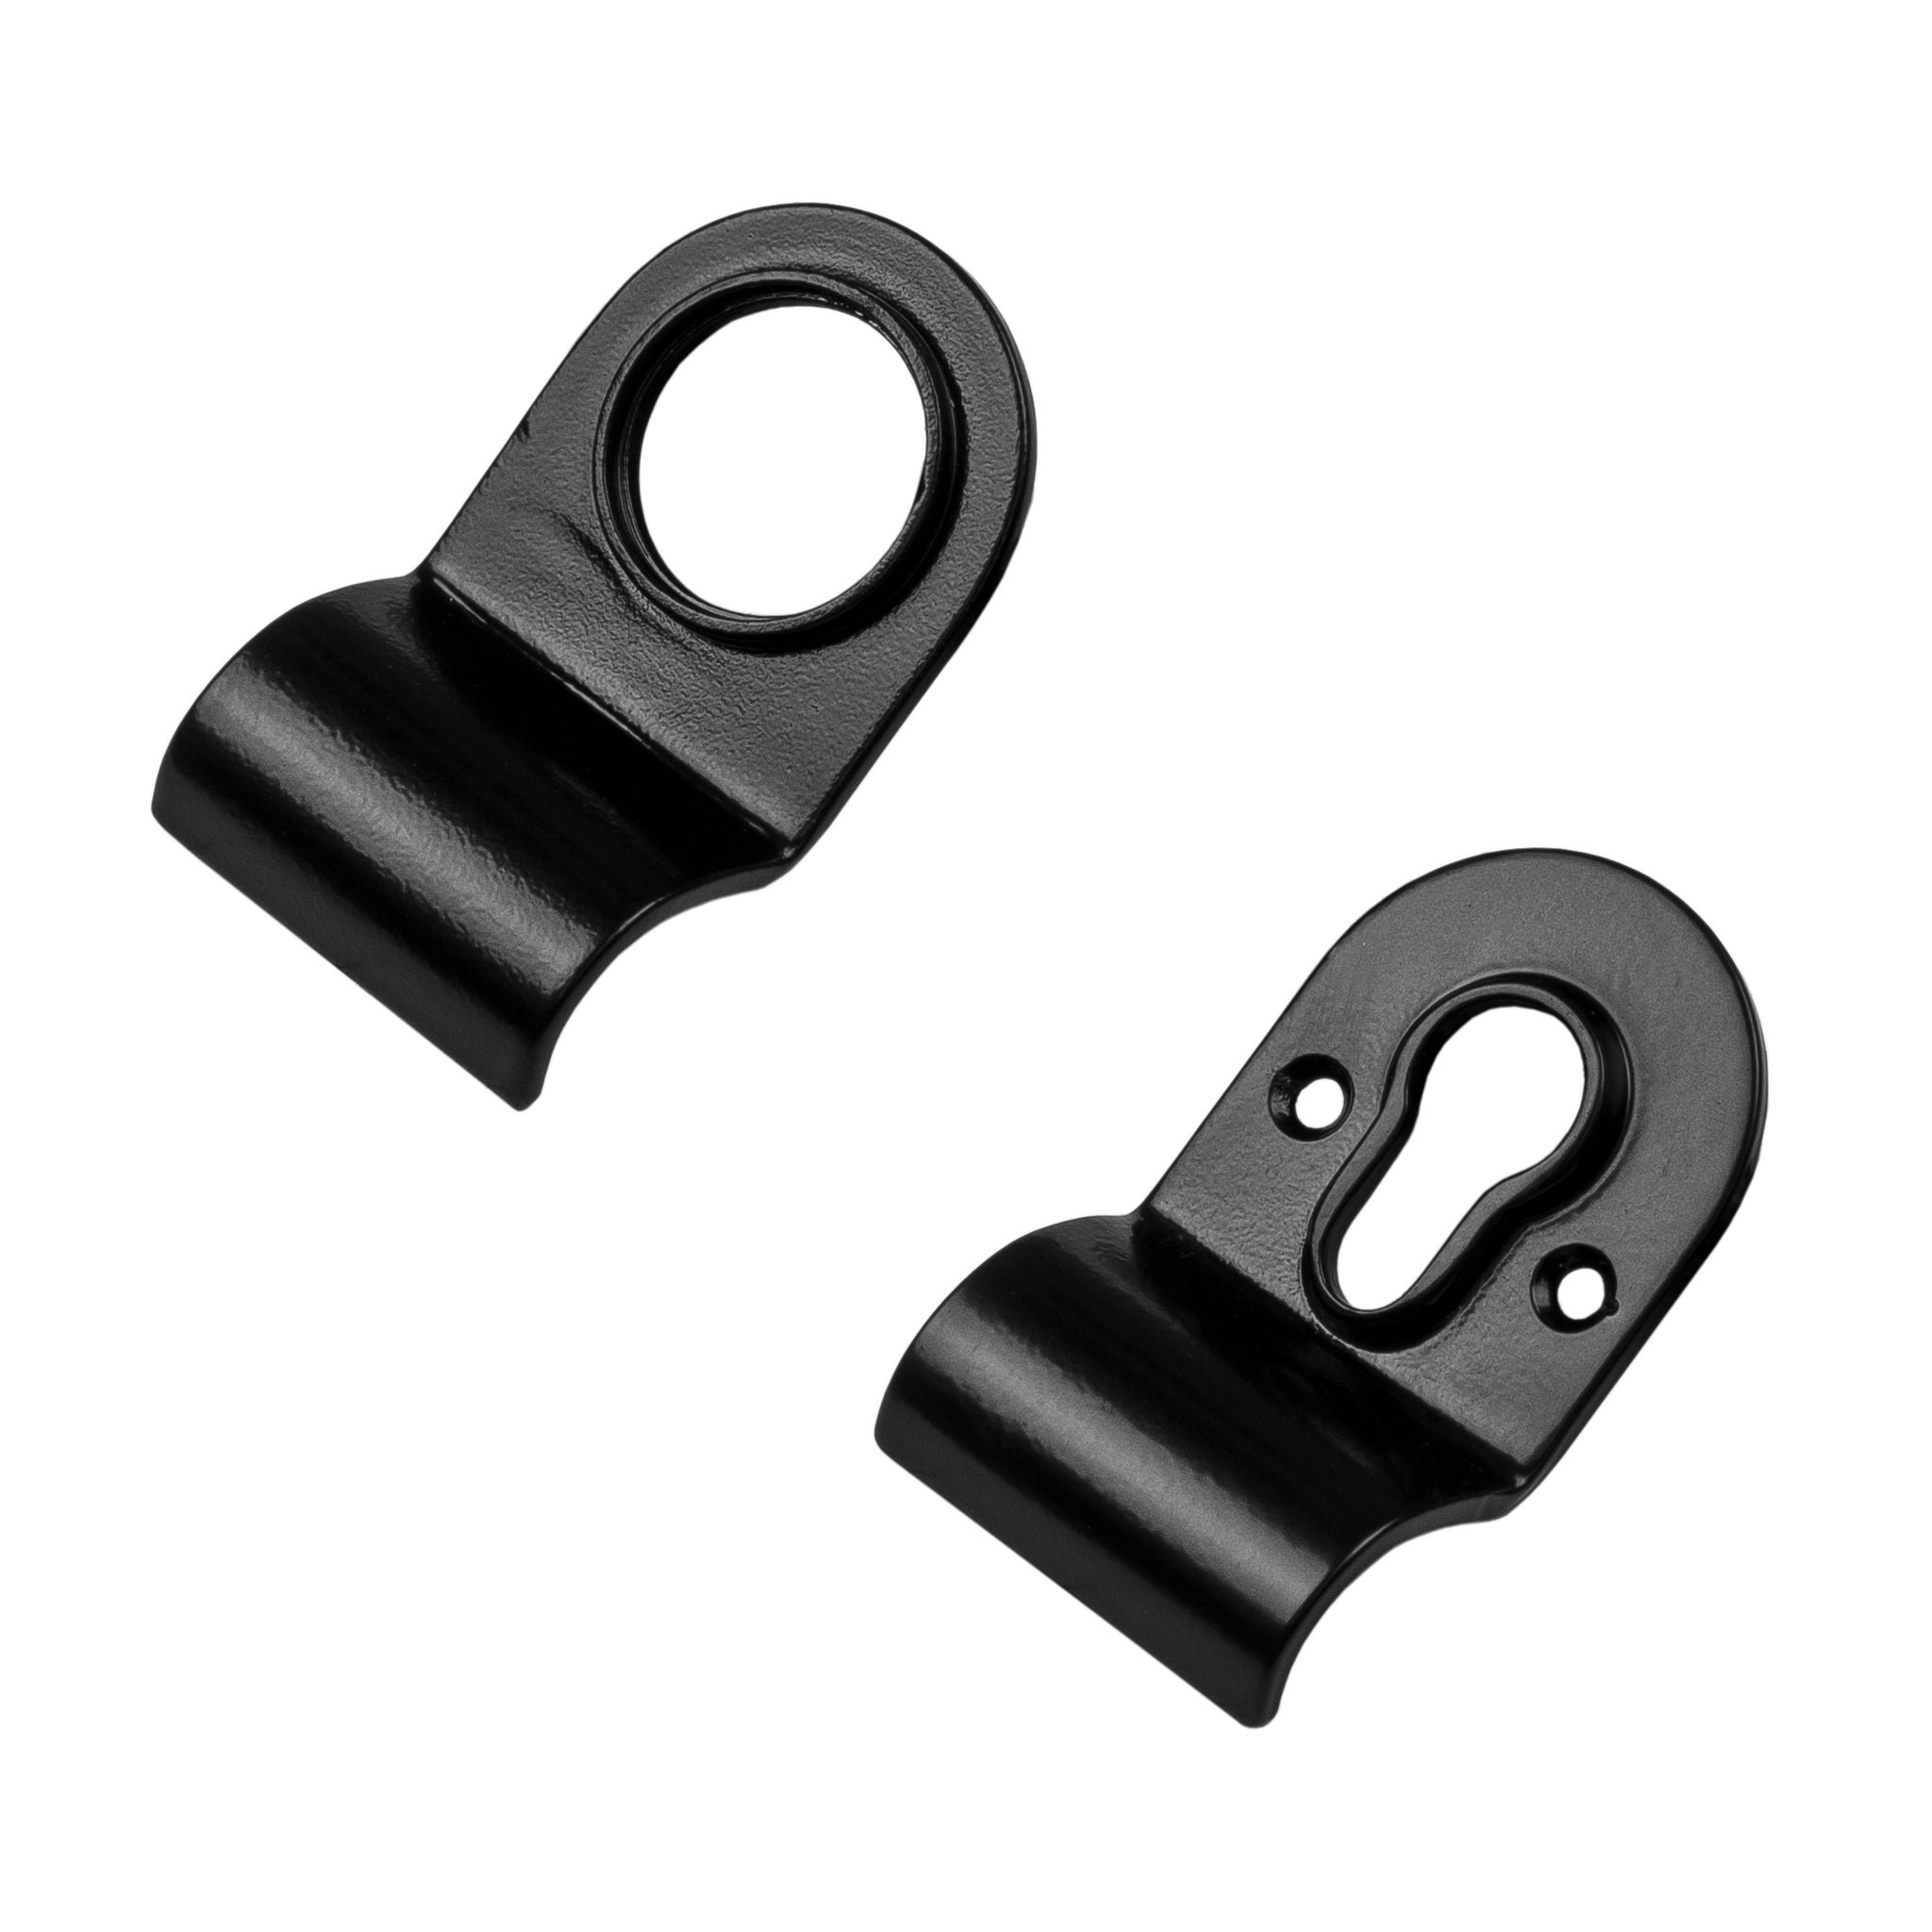 Cylinder Latch Pulls with Armor-Coat